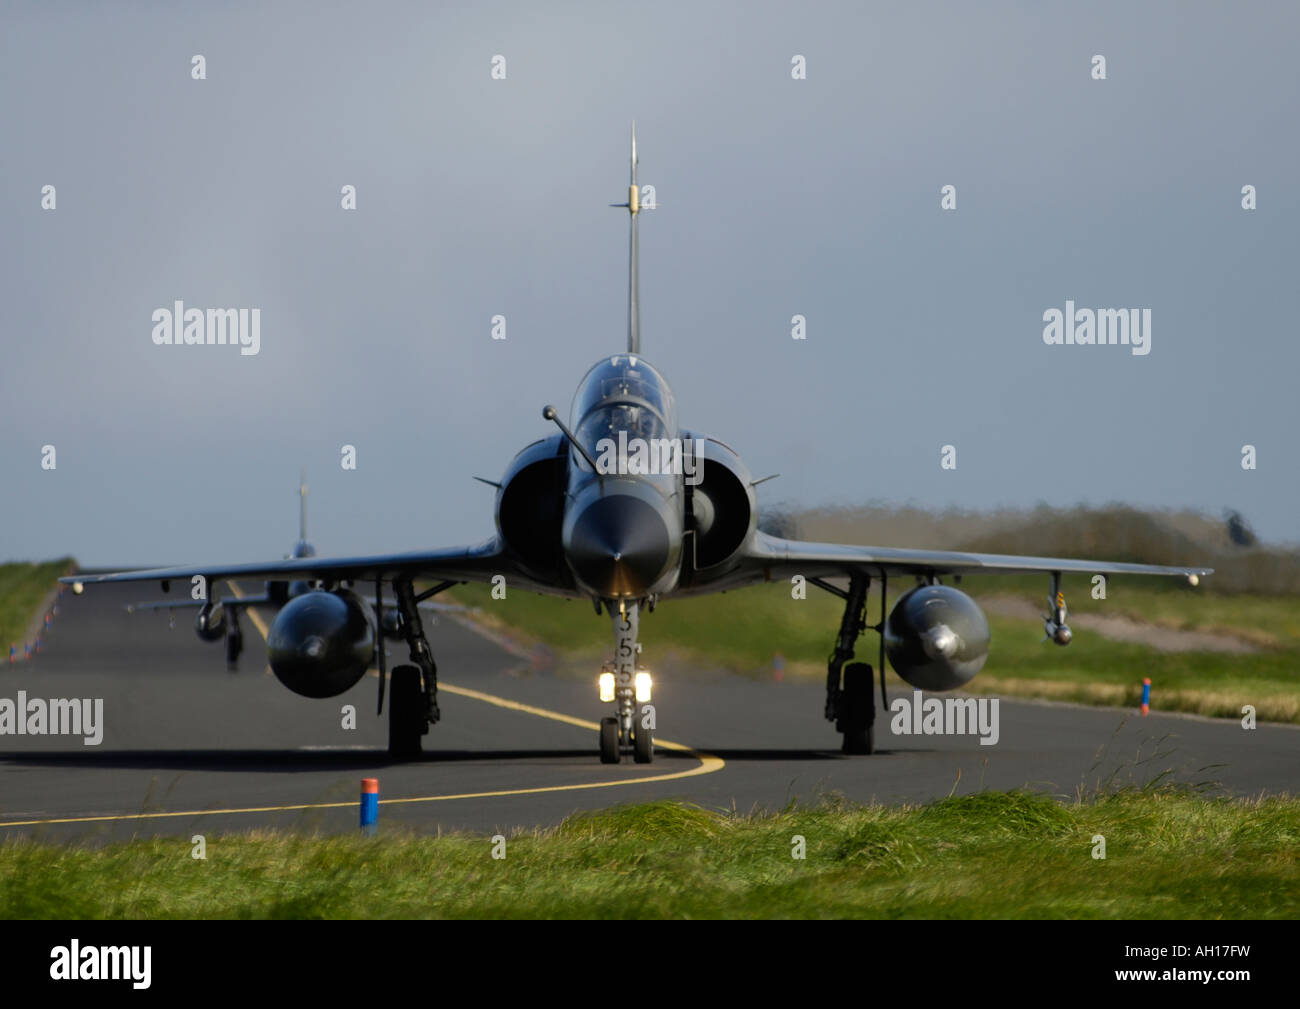 Dassault Mirage 2000N French Marine Navy Two Seat Trainer Variant Air Superiority Attack Fighter Jet Stock Photo